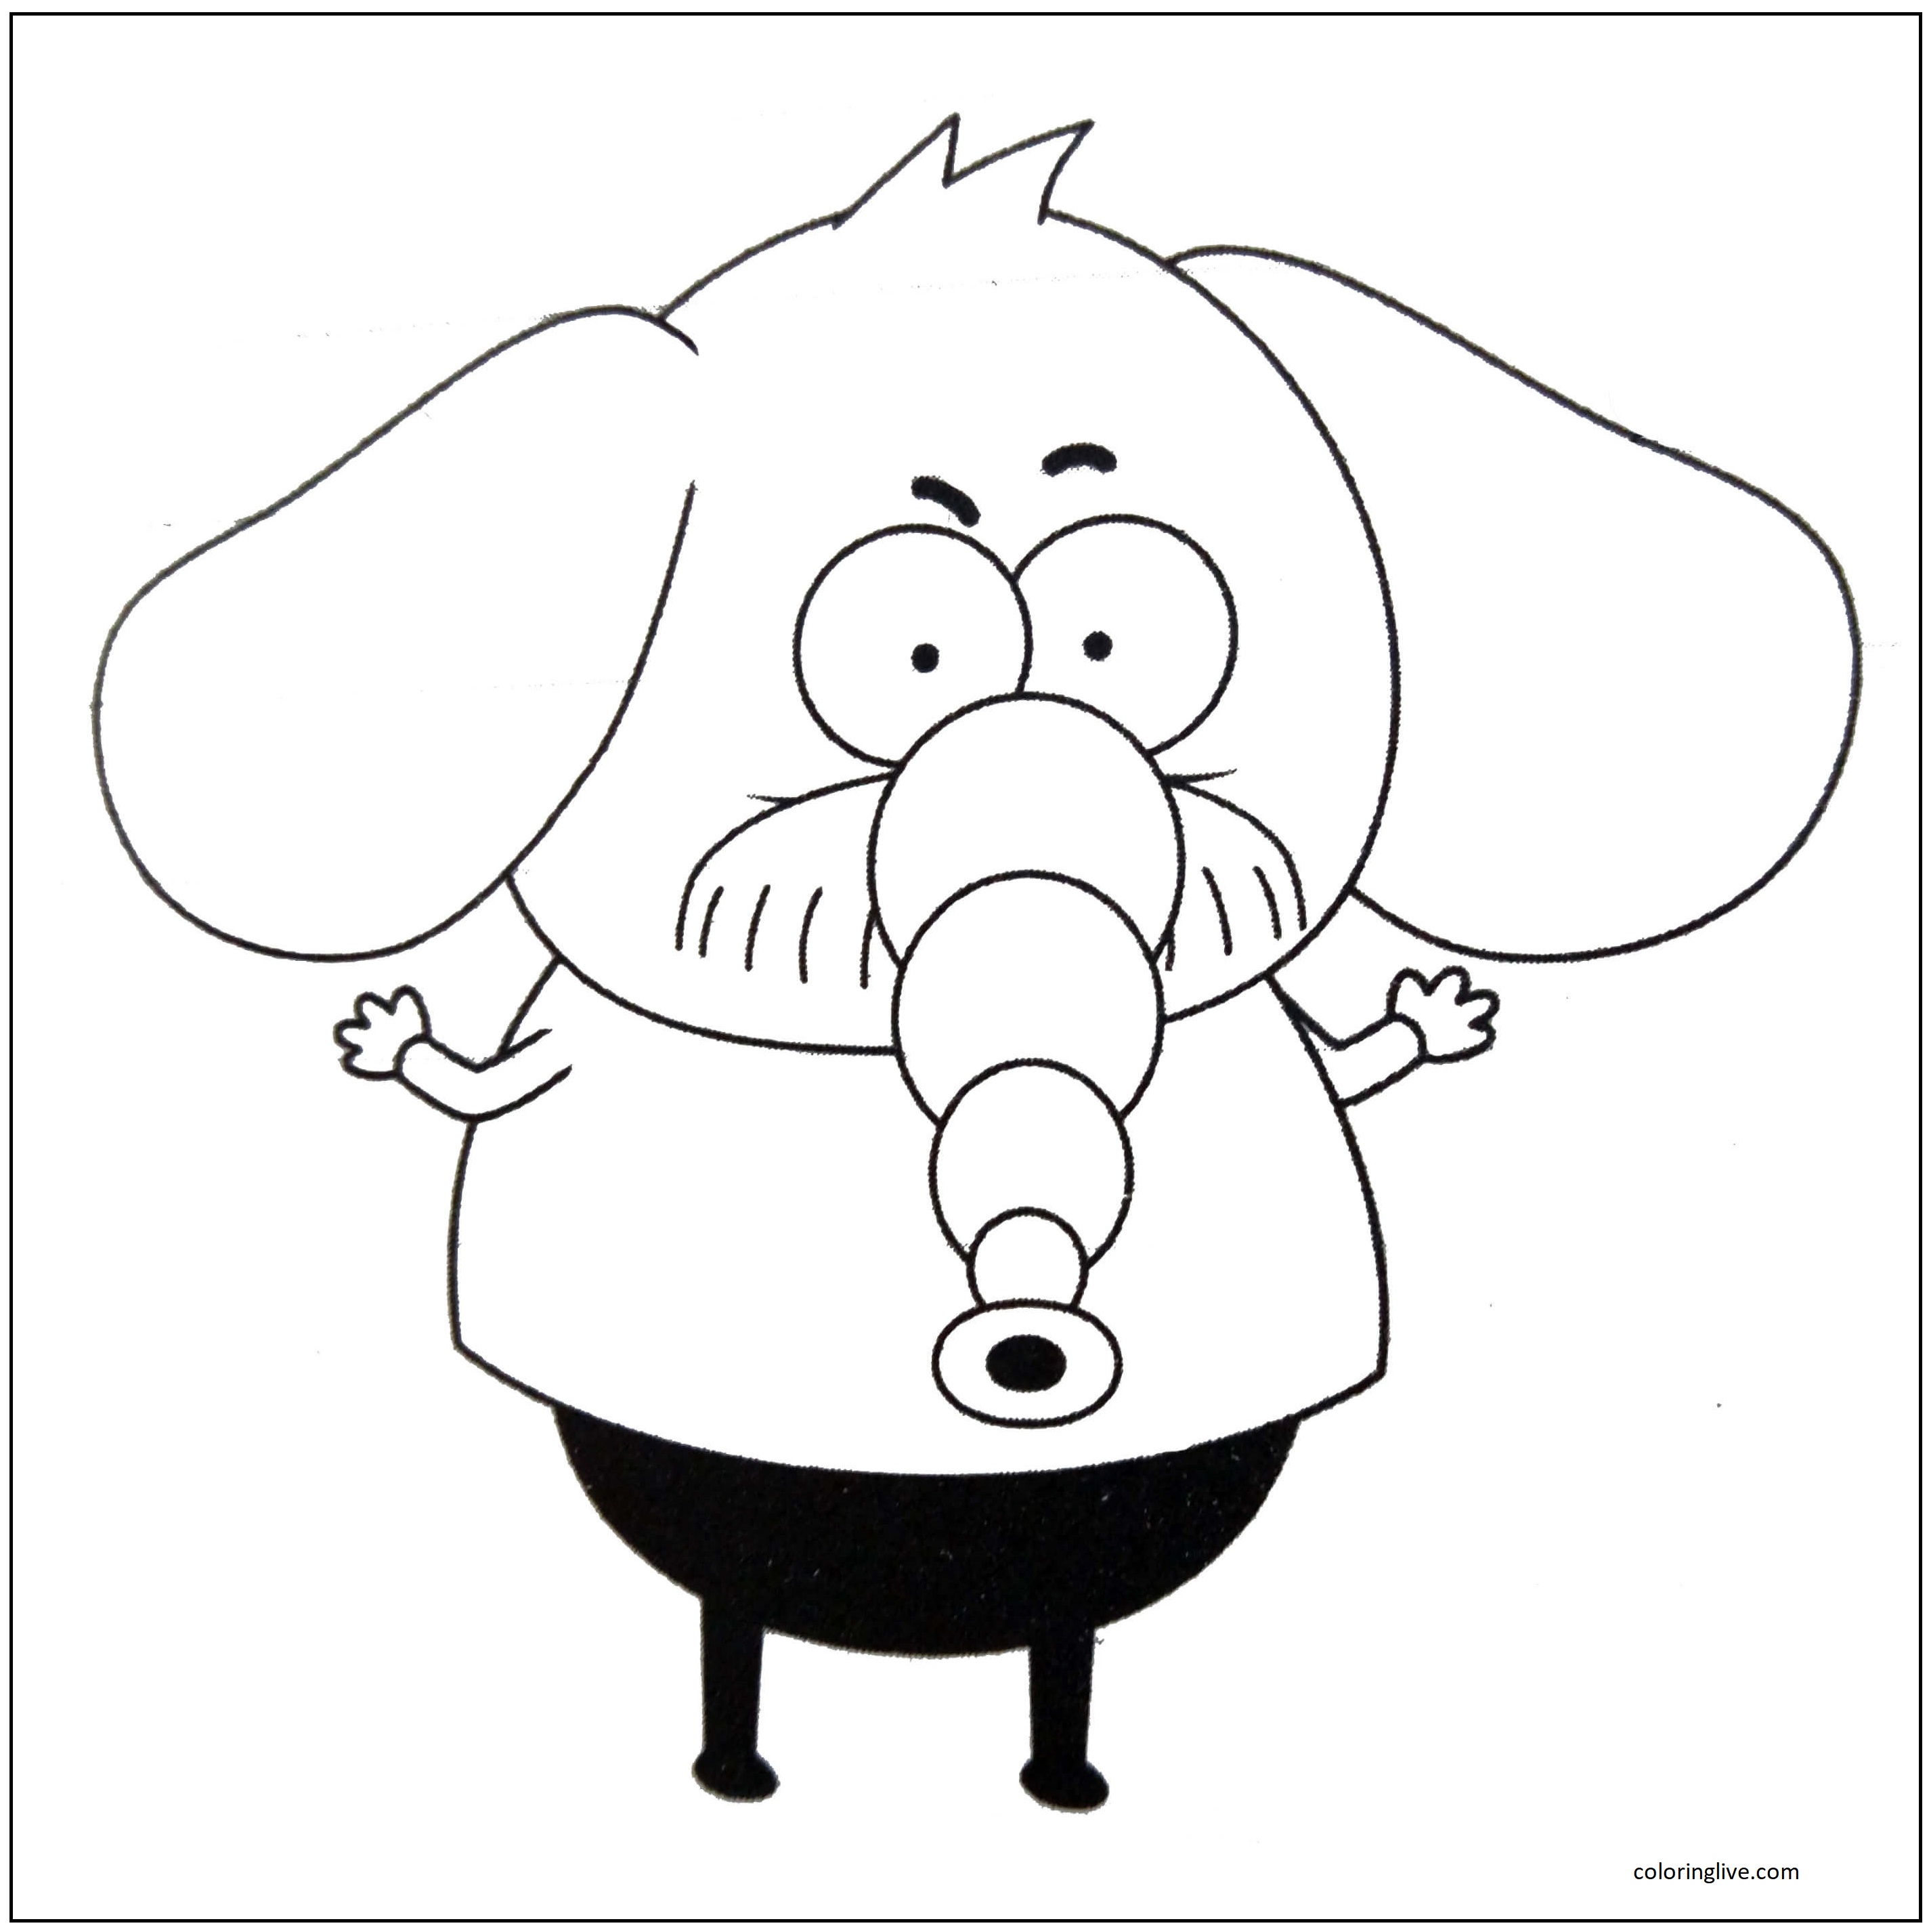 Printable Elephant Remzi from King Shakir Coloring Page for kids.